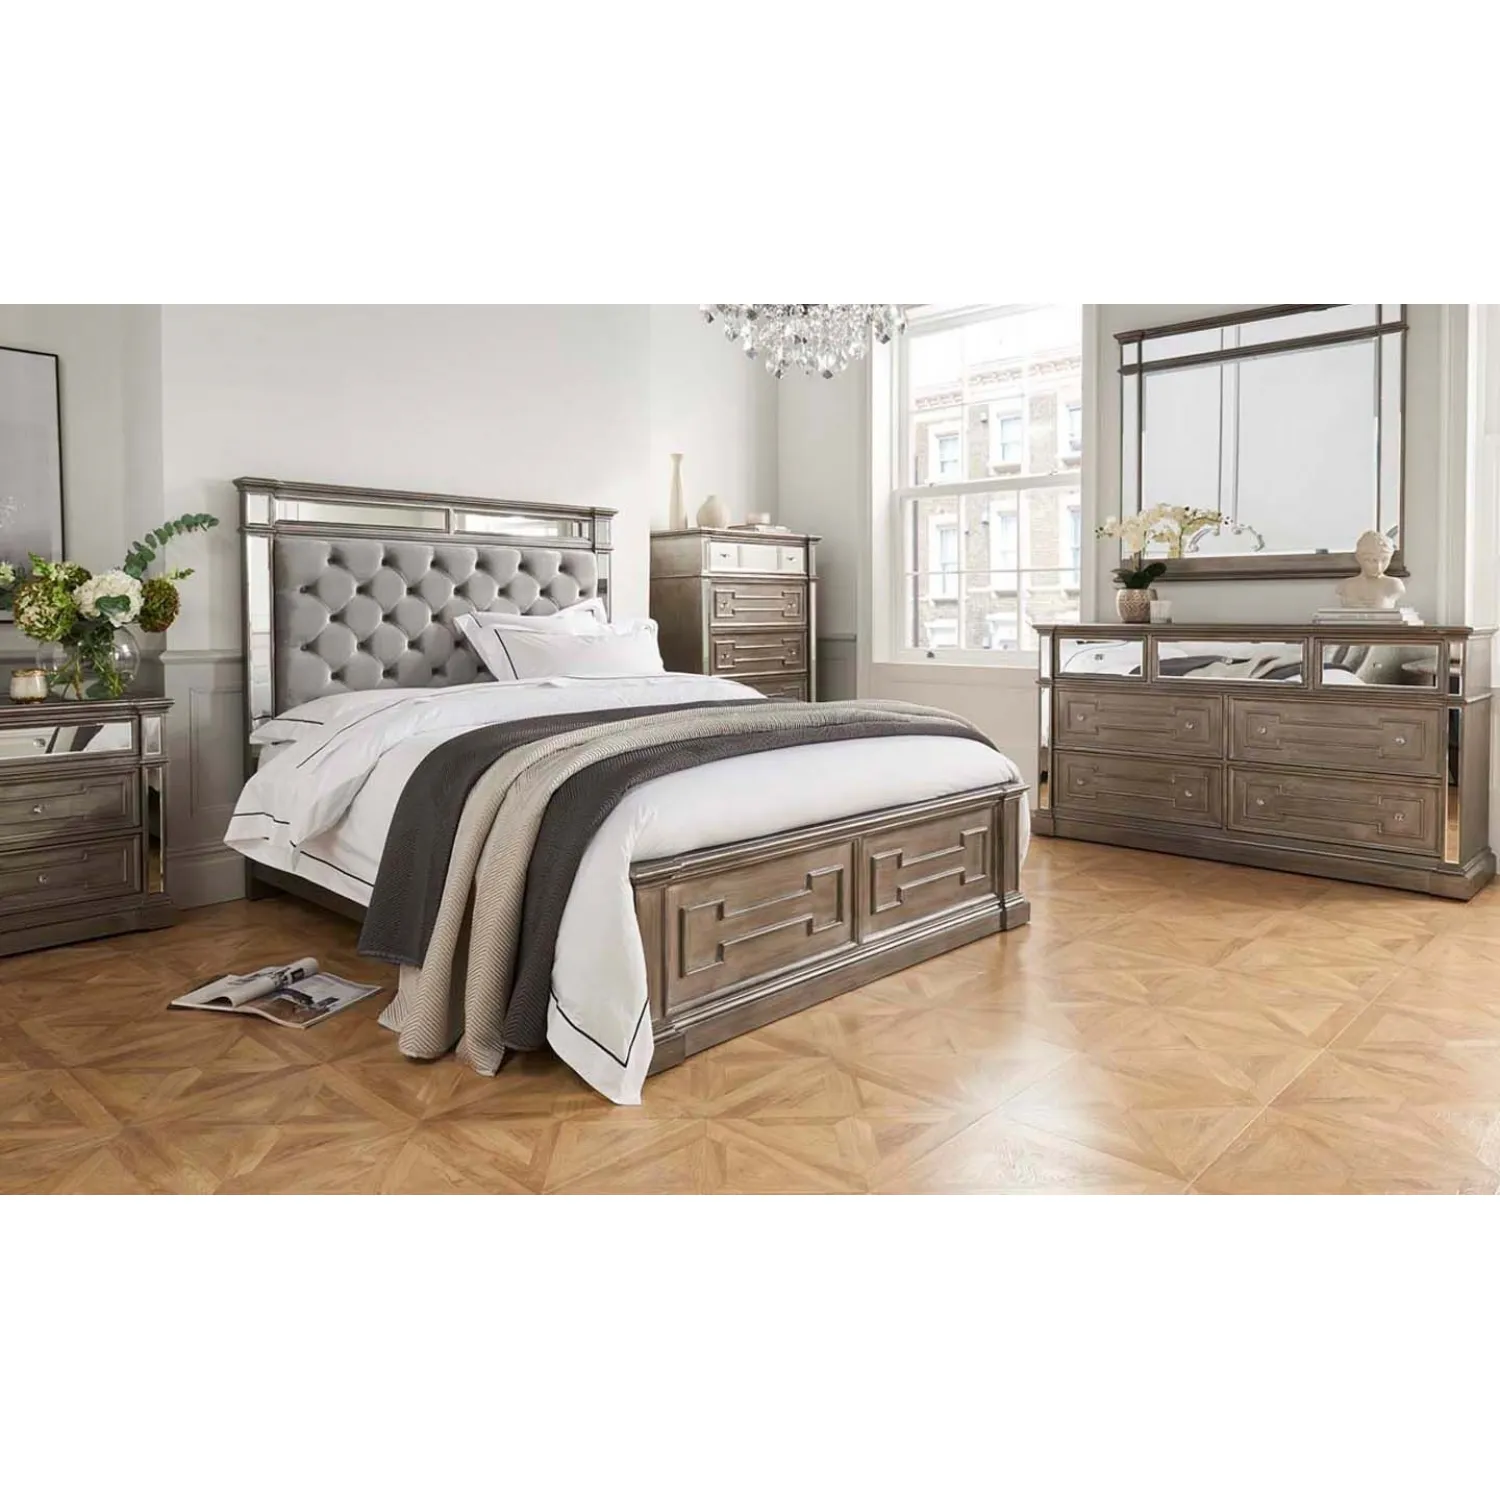 Silver Wooden 6ft Super King Size 180cm Bed